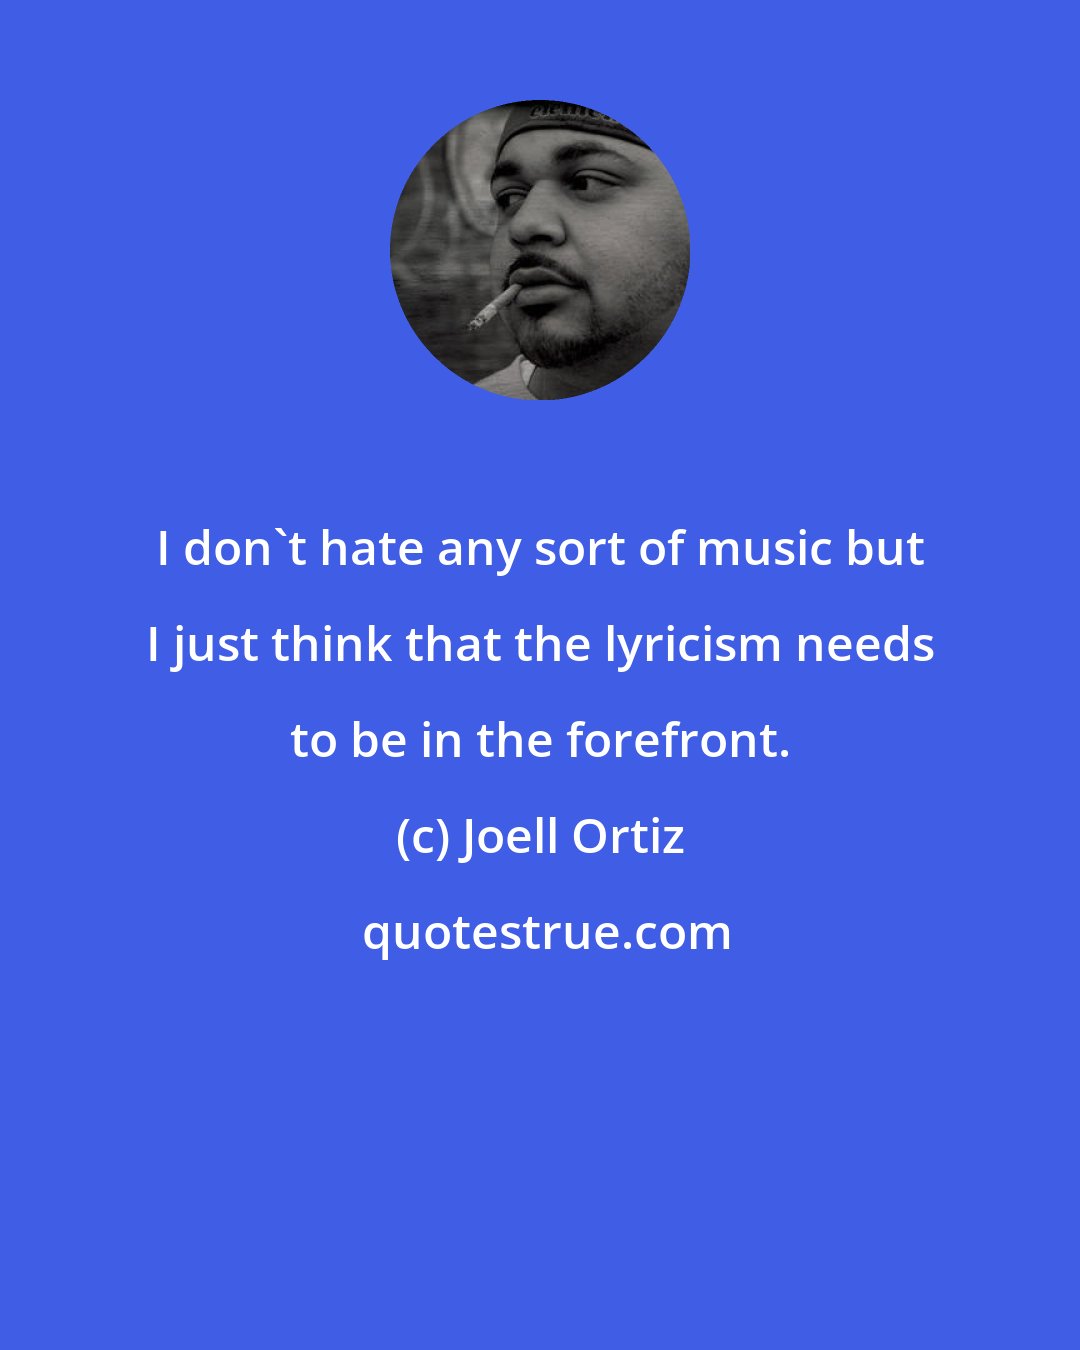 Joell Ortiz: I don't hate any sort of music but I just think that the lyricism needs to be in the forefront.